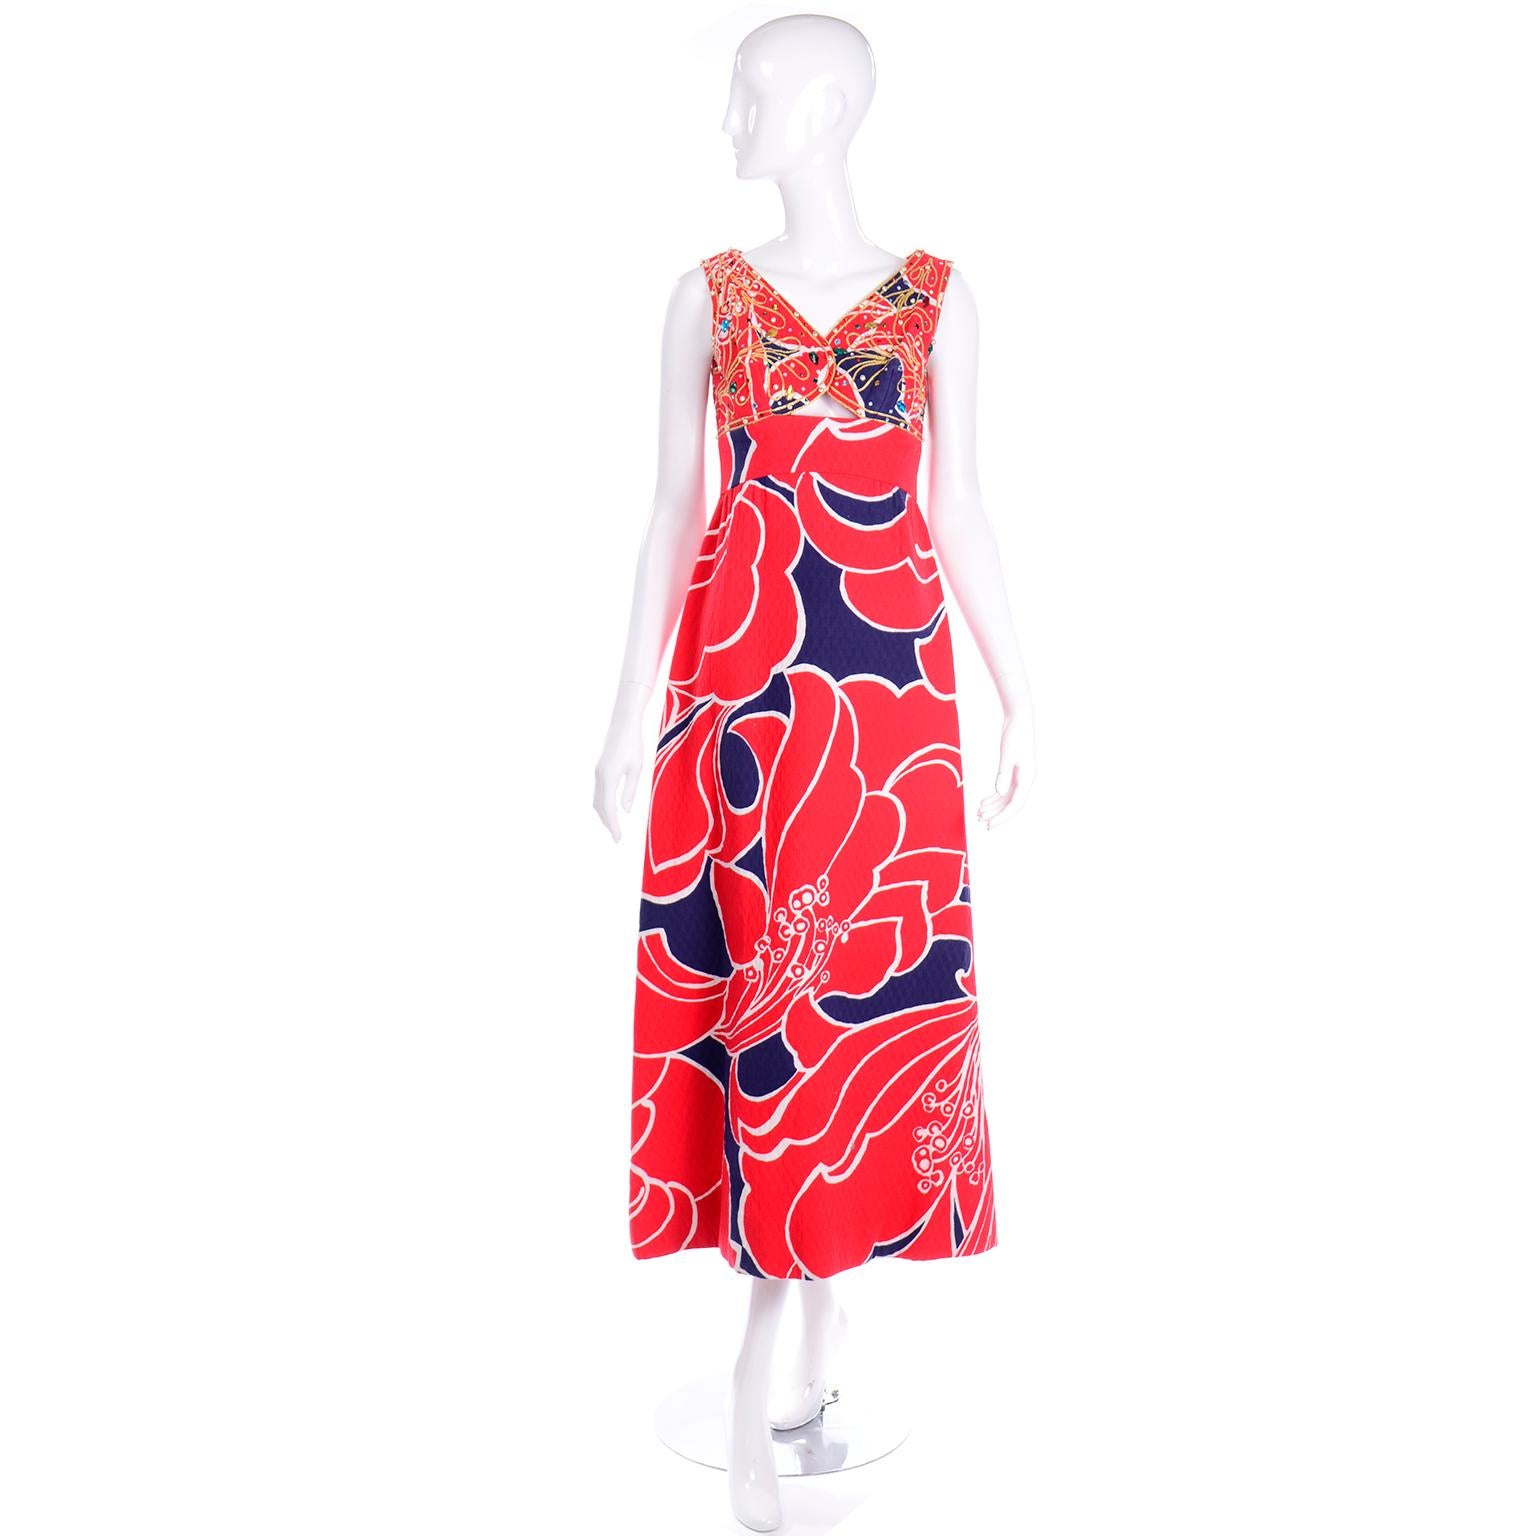 This vintage red, white, and blue cotton sleeveless maxi dress is so gorgeous! This Bonwit Teller maxi dress has incredible colorful jewels and gold embroidery throughout the front and back of the bodice. We love the peek a boo small triangle